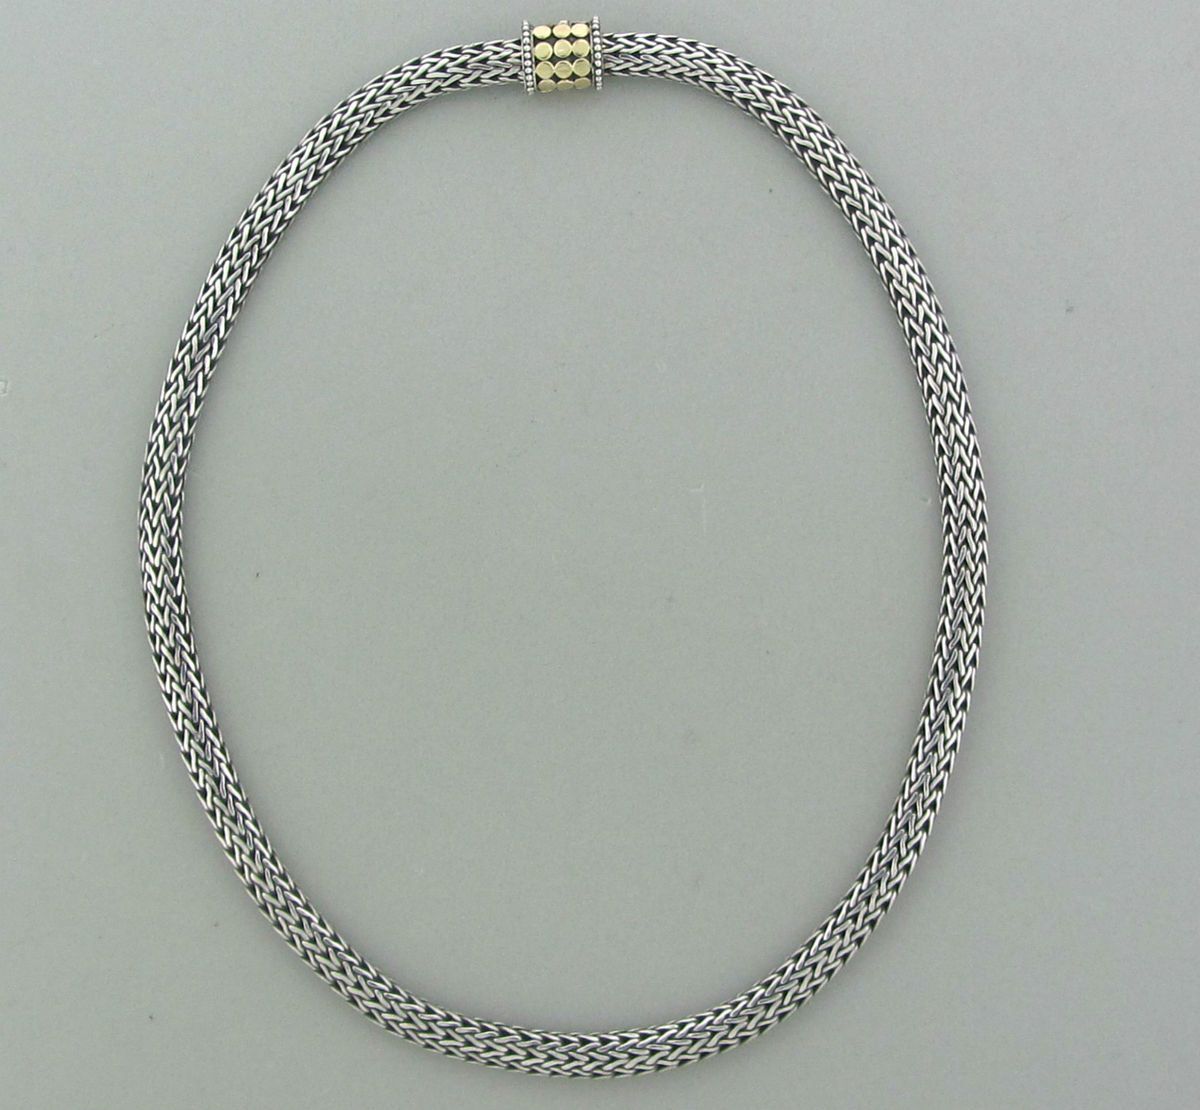 JOHN HARDY DOTS COLLECTION STERLING SILVER 18K GOLD WOVEN 6mm CHAIN